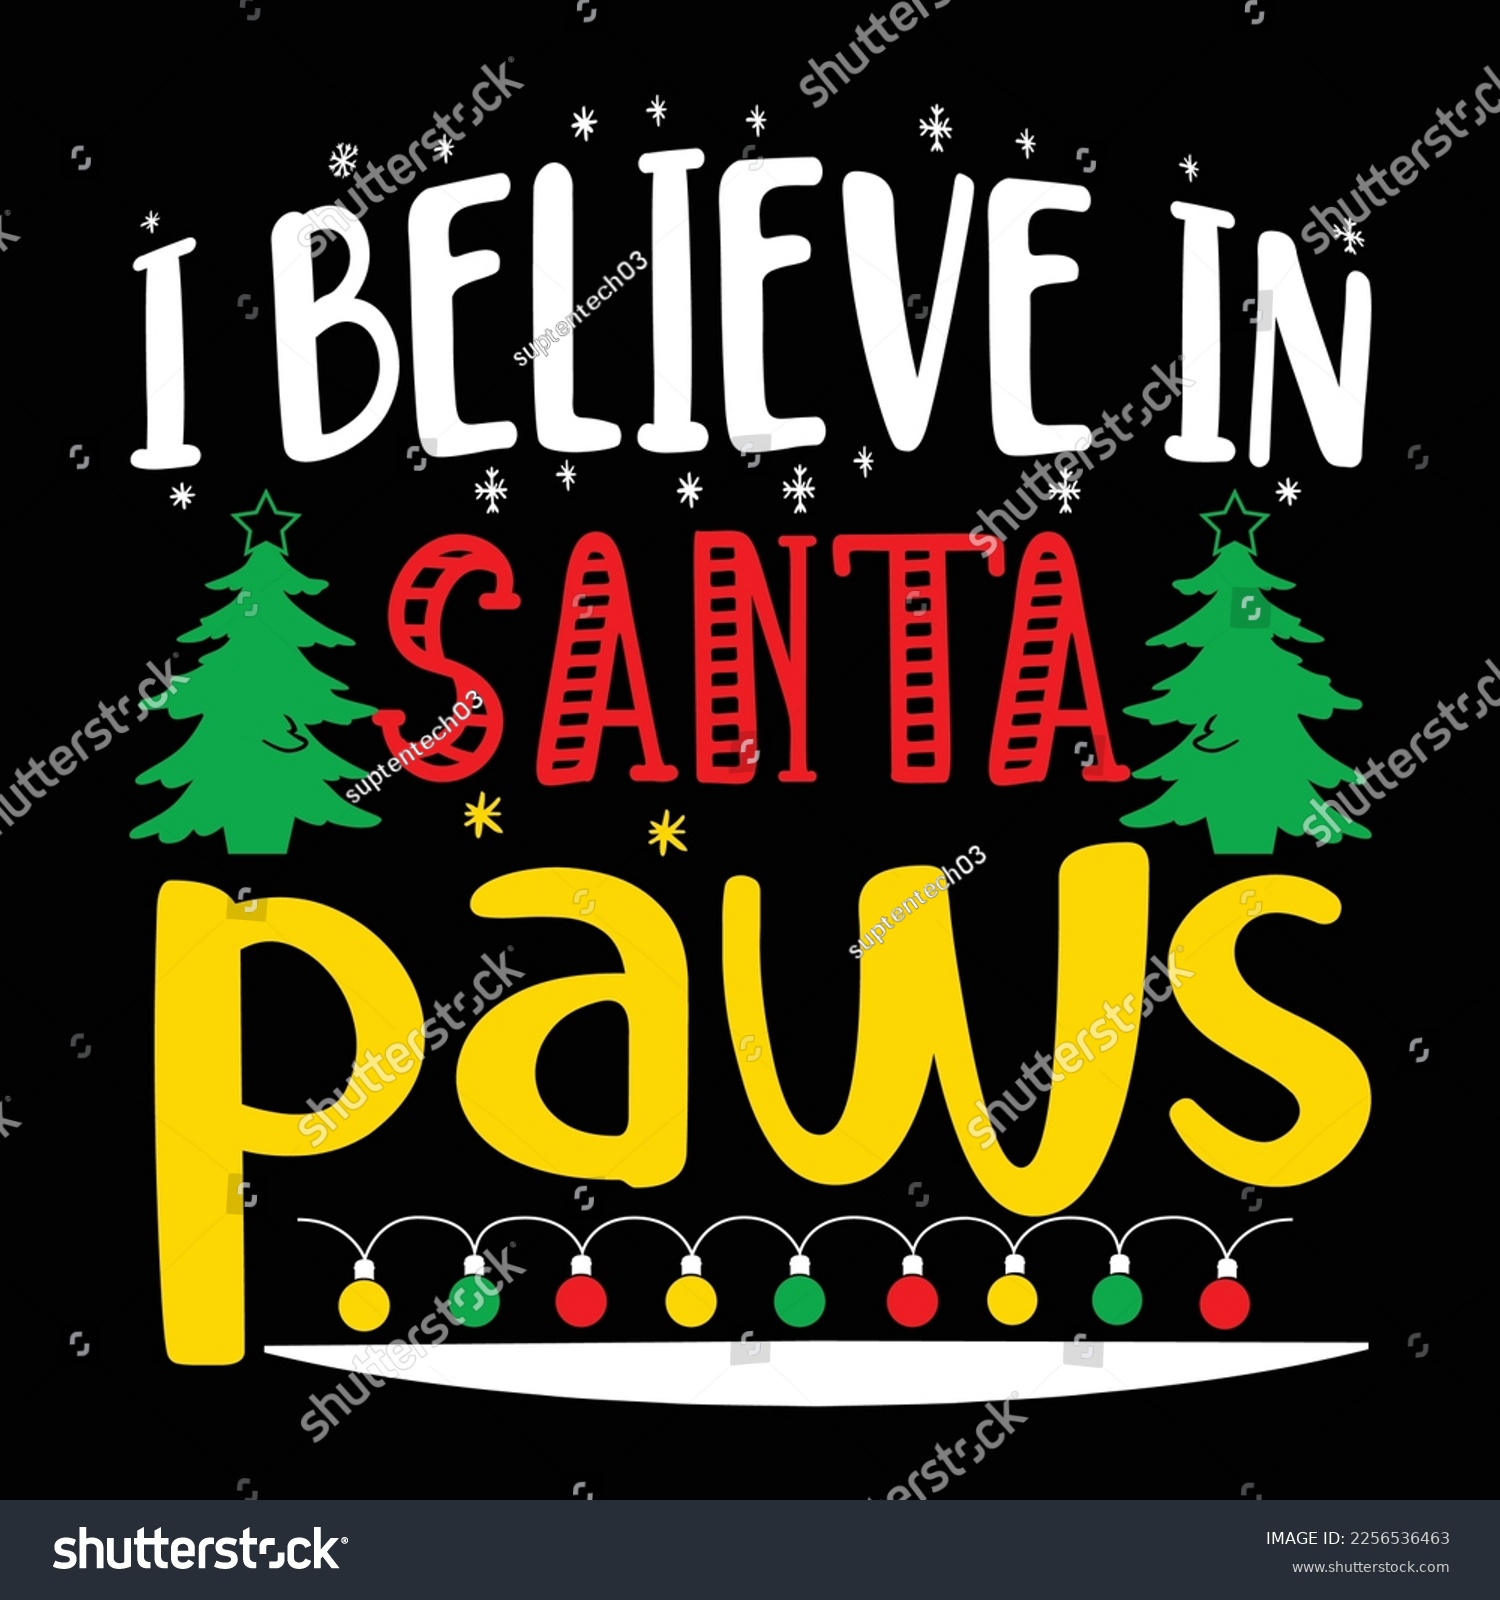 SVG of I Believe IN Santa Paws, Merry Christmas shirts Print Template, Xmas Ugly Snow Santa Clouse New Year Holiday Candy Santa Hat vector illustration for Christmas hand lettered svg